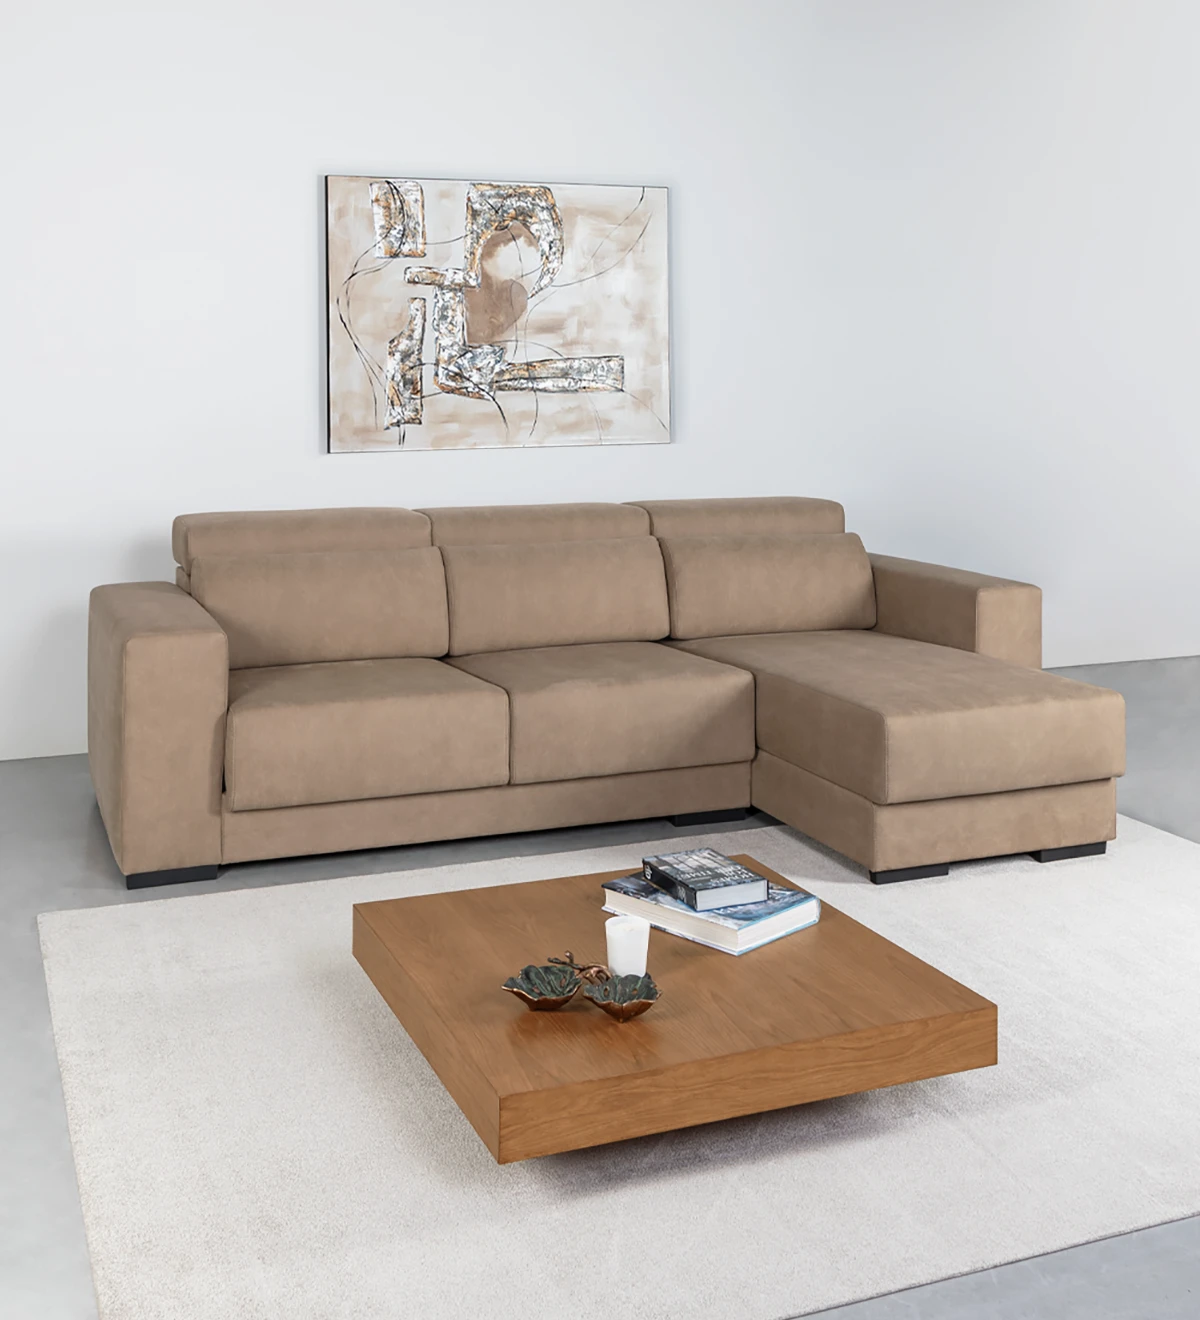 2 seater sofa with reversible chaise longue, upholstered in fabric, with reclining headrests, sliding seats, and storage on the chaise longue.